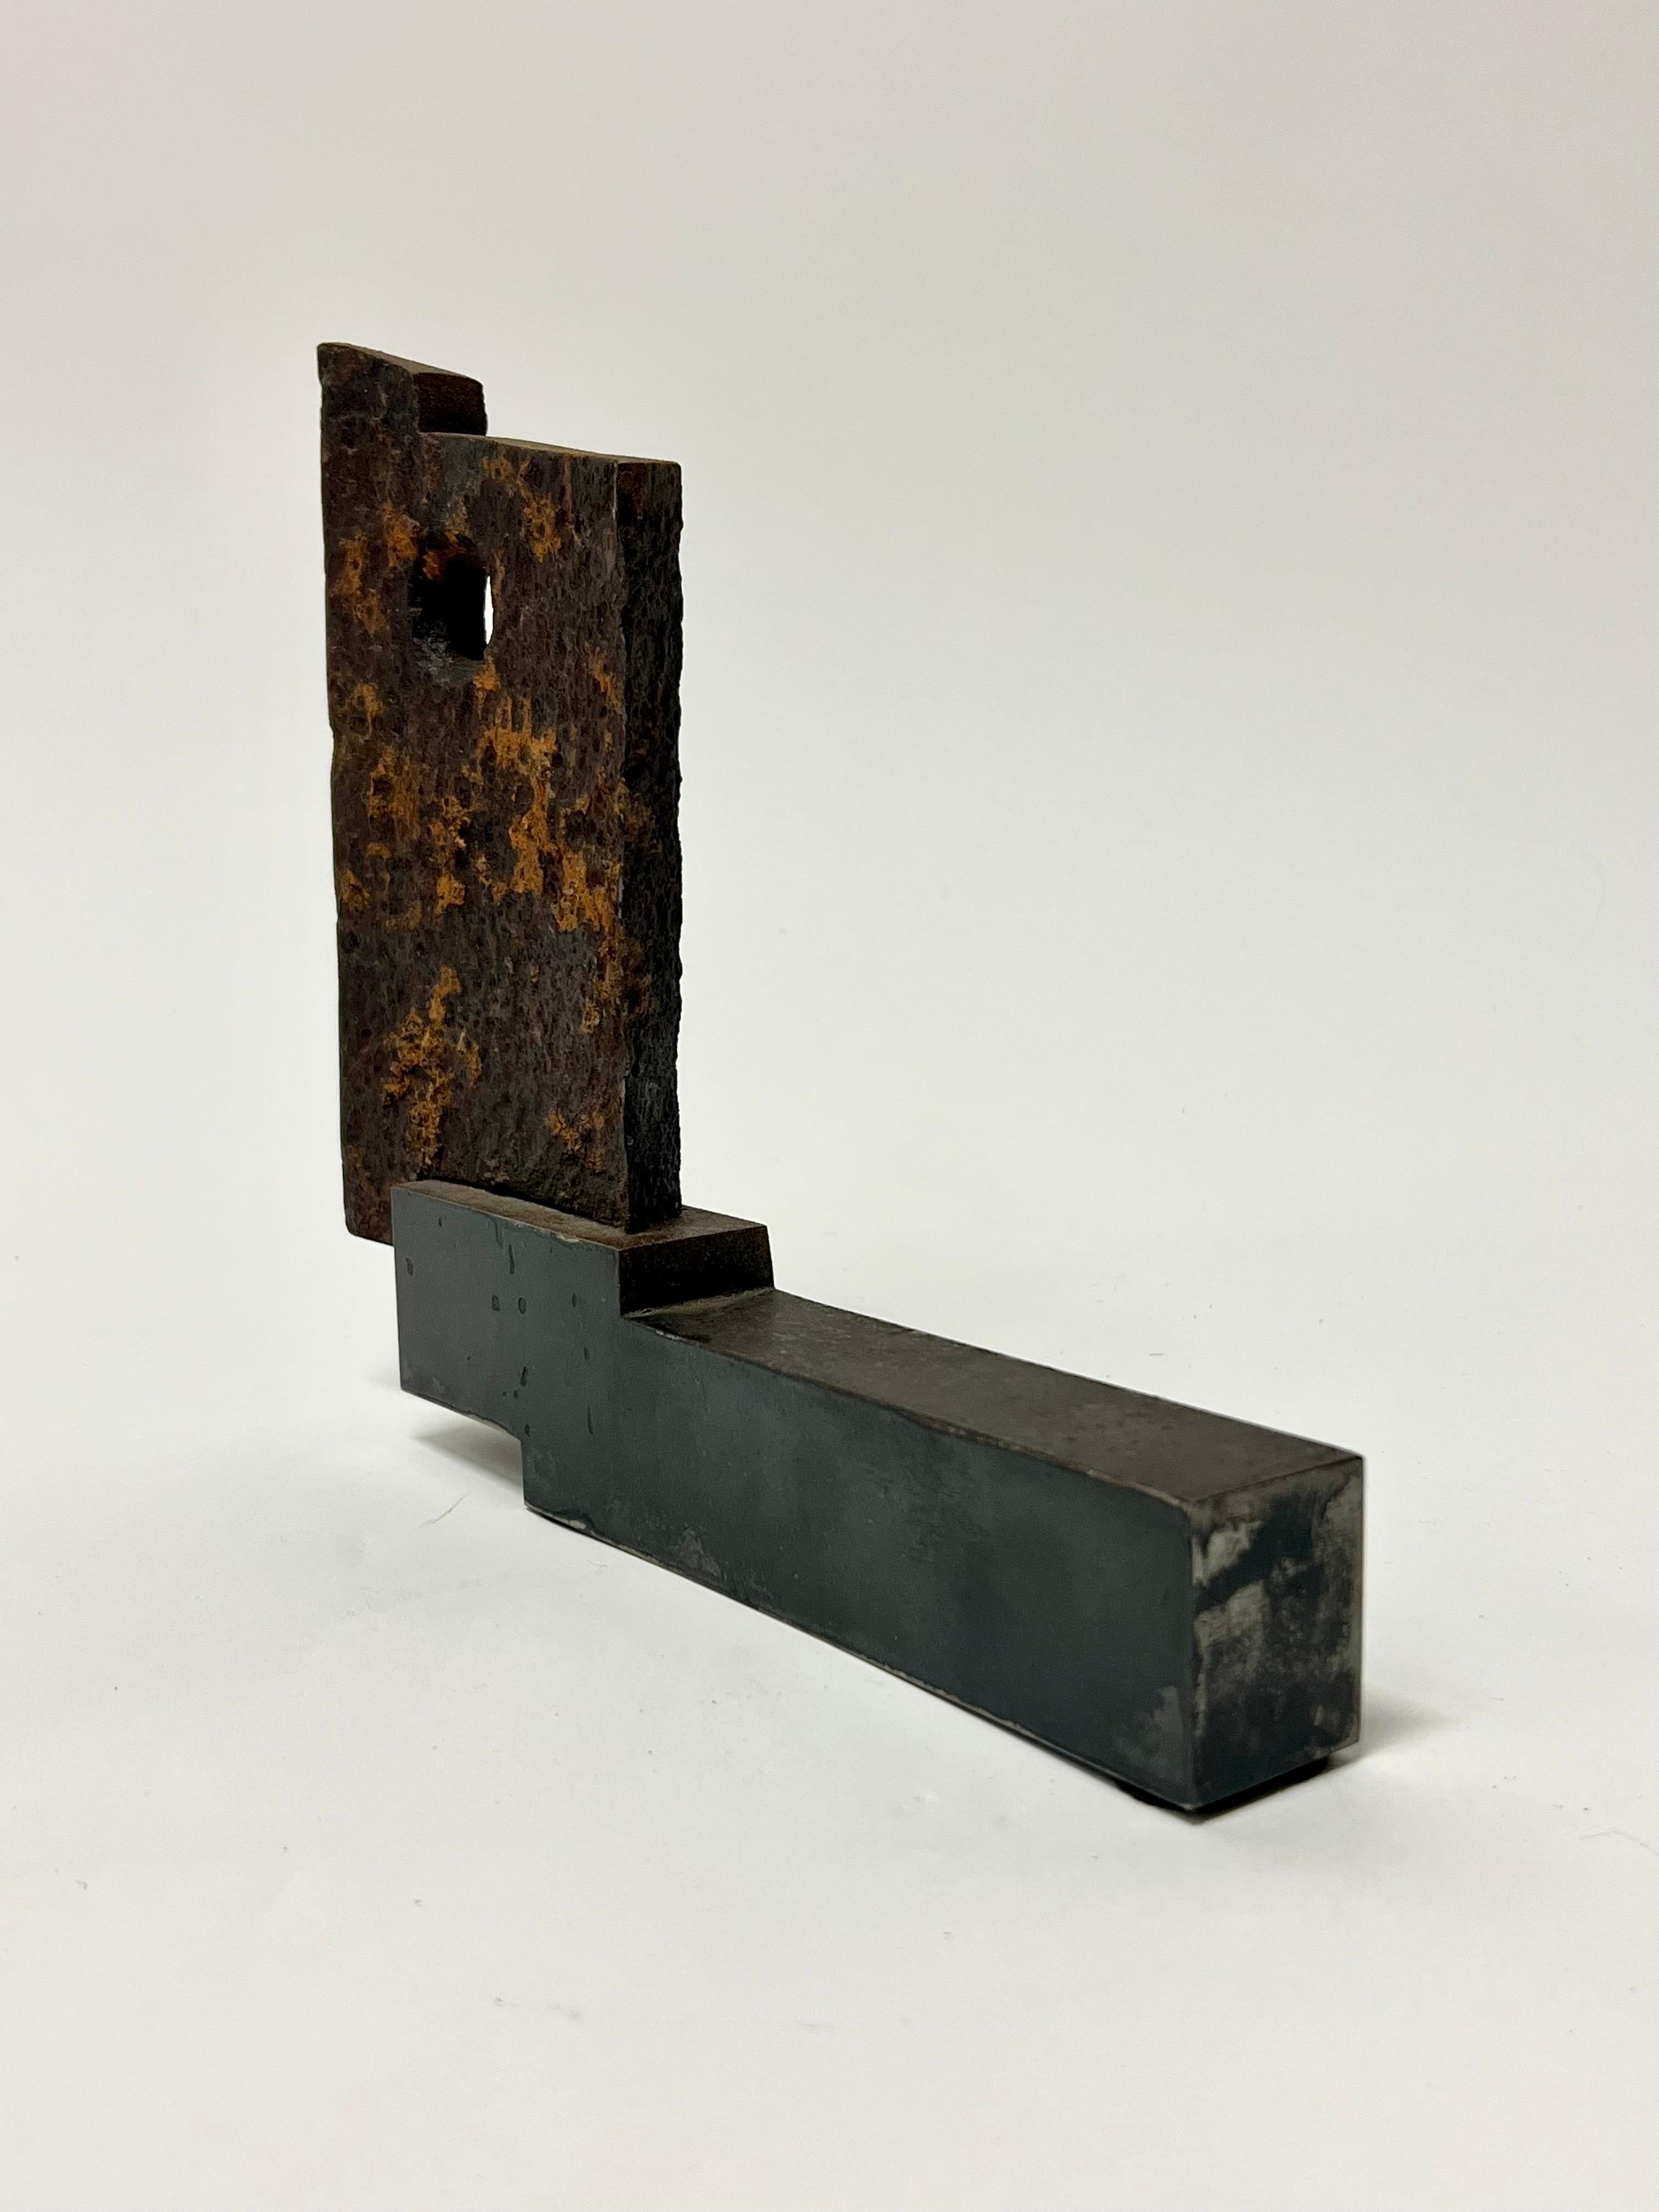 Exceptional modern iron & steel sculpture by Robyn Horn, c1980s. Horn (1951-) was born in Fort Smith Arkansas, and went to Hendrix College in Conway, Arkansas. This is considered to be one of her early pieces, and quite rare. 

Horn’s work has been